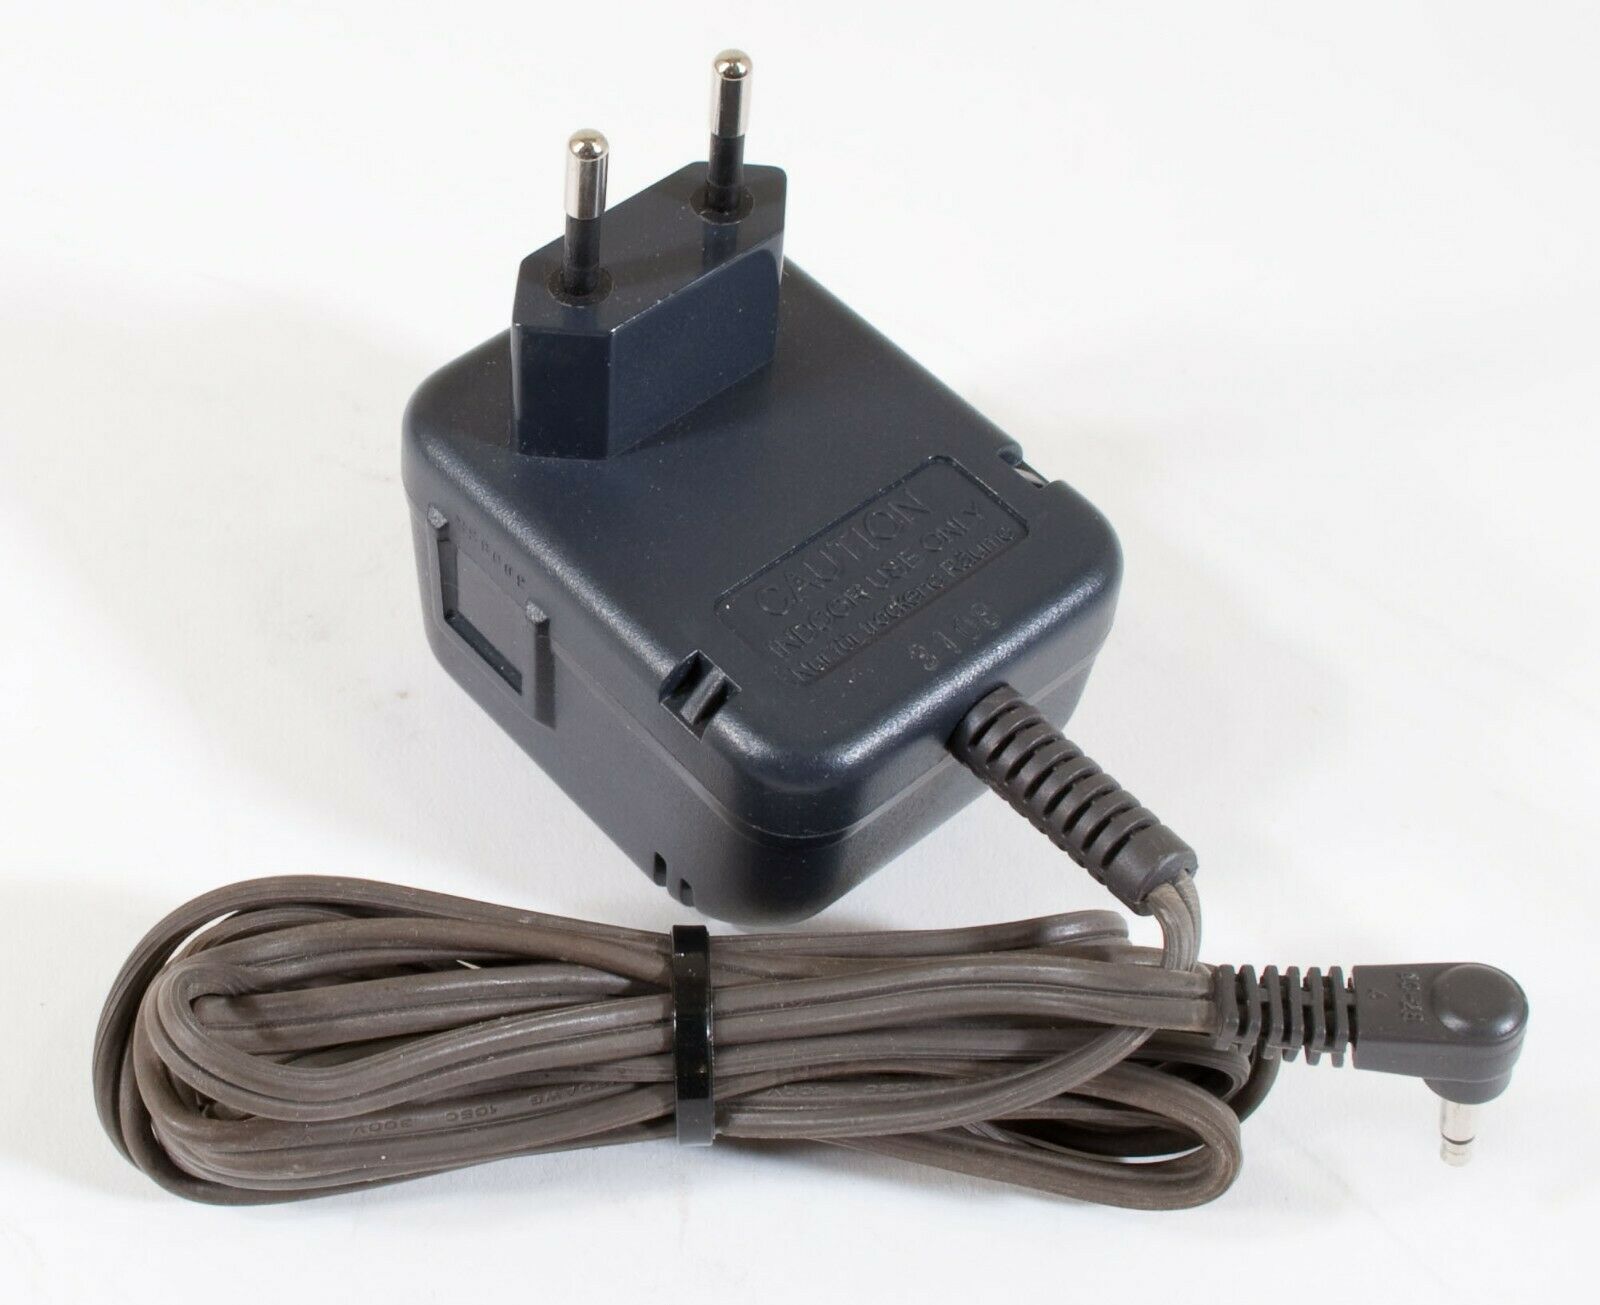 NEW WOOLWORTHS CHARGER MEC-A6150 12V 400mA USA UK EU PLUG power cord MPN: Does Not Apply Brand: WOOLWORTHS Compatible - Click Image to Close